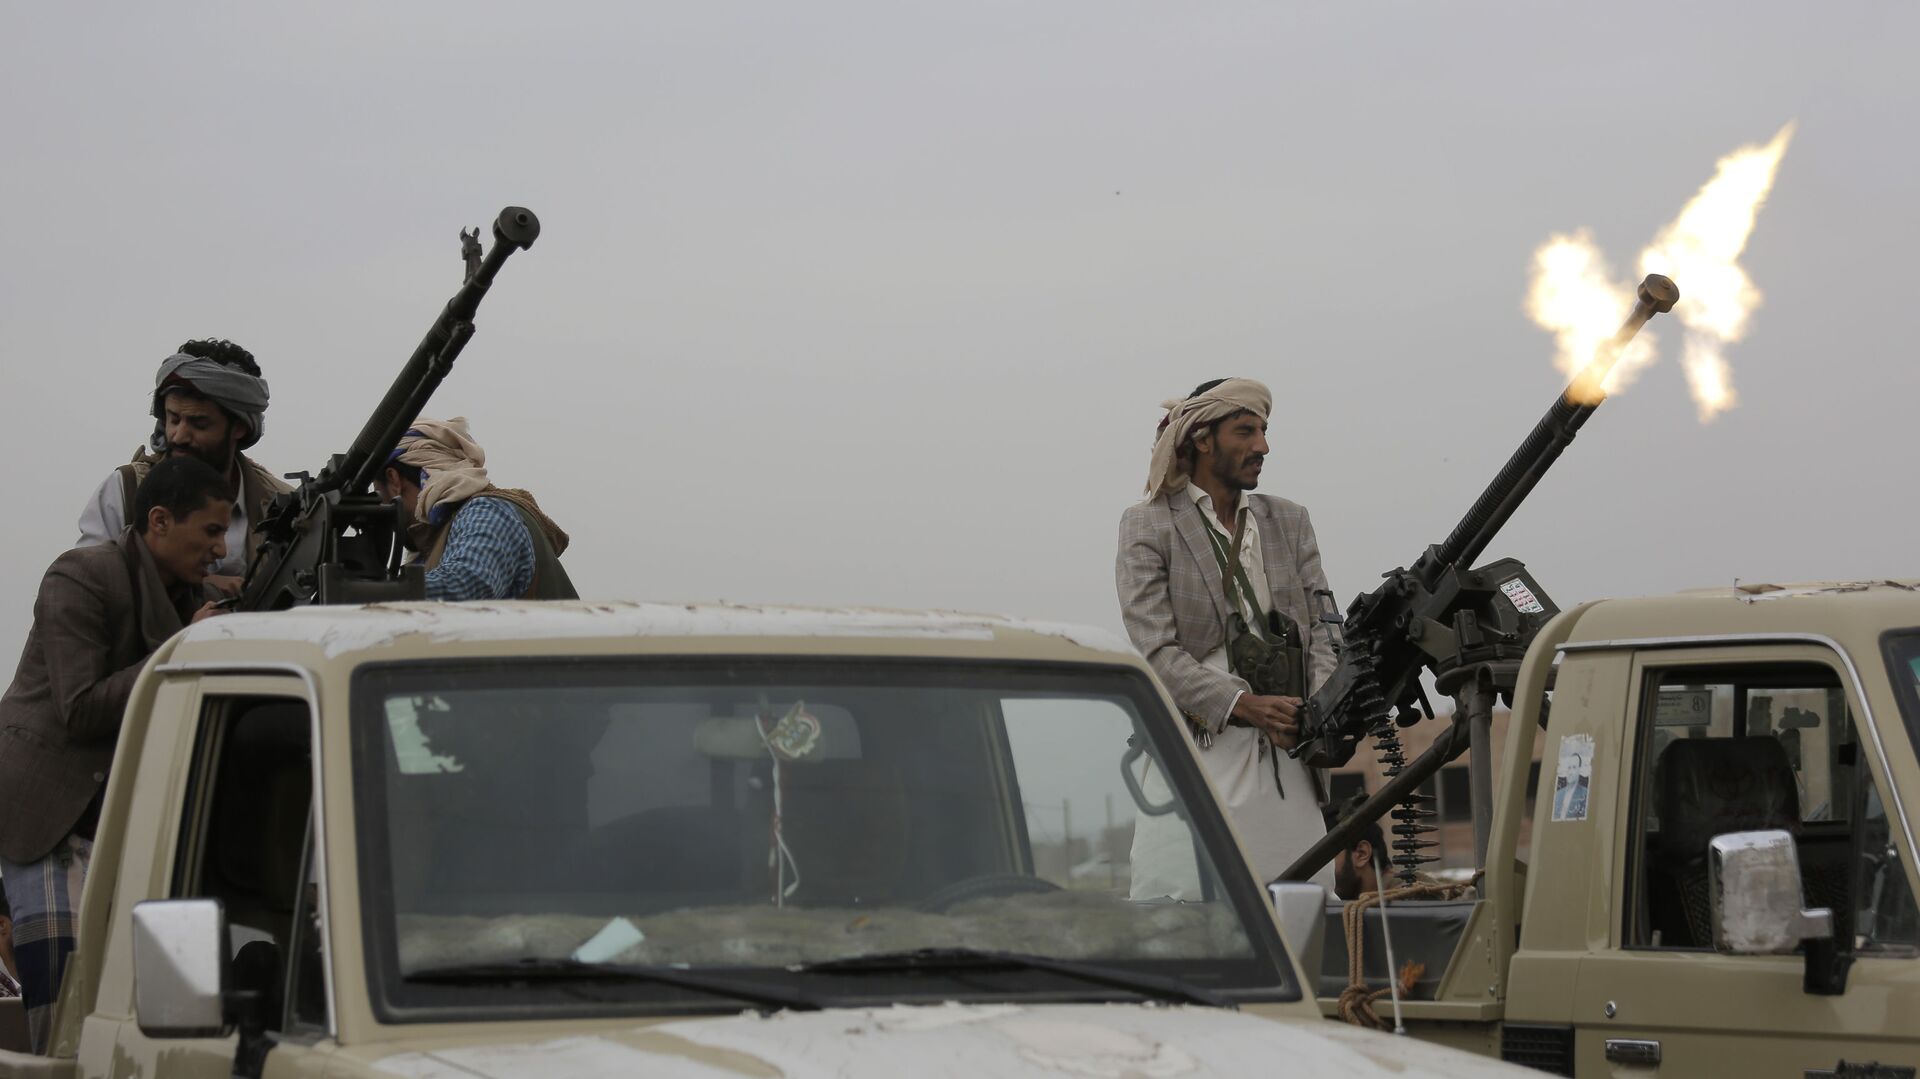 A Houthi rebel fighter fires in the air during a gathering aimed at mobilizing more fighters for the Houthi movement, in Sanaa, Yemen - Sputnik International, 1920, 30.01.2022